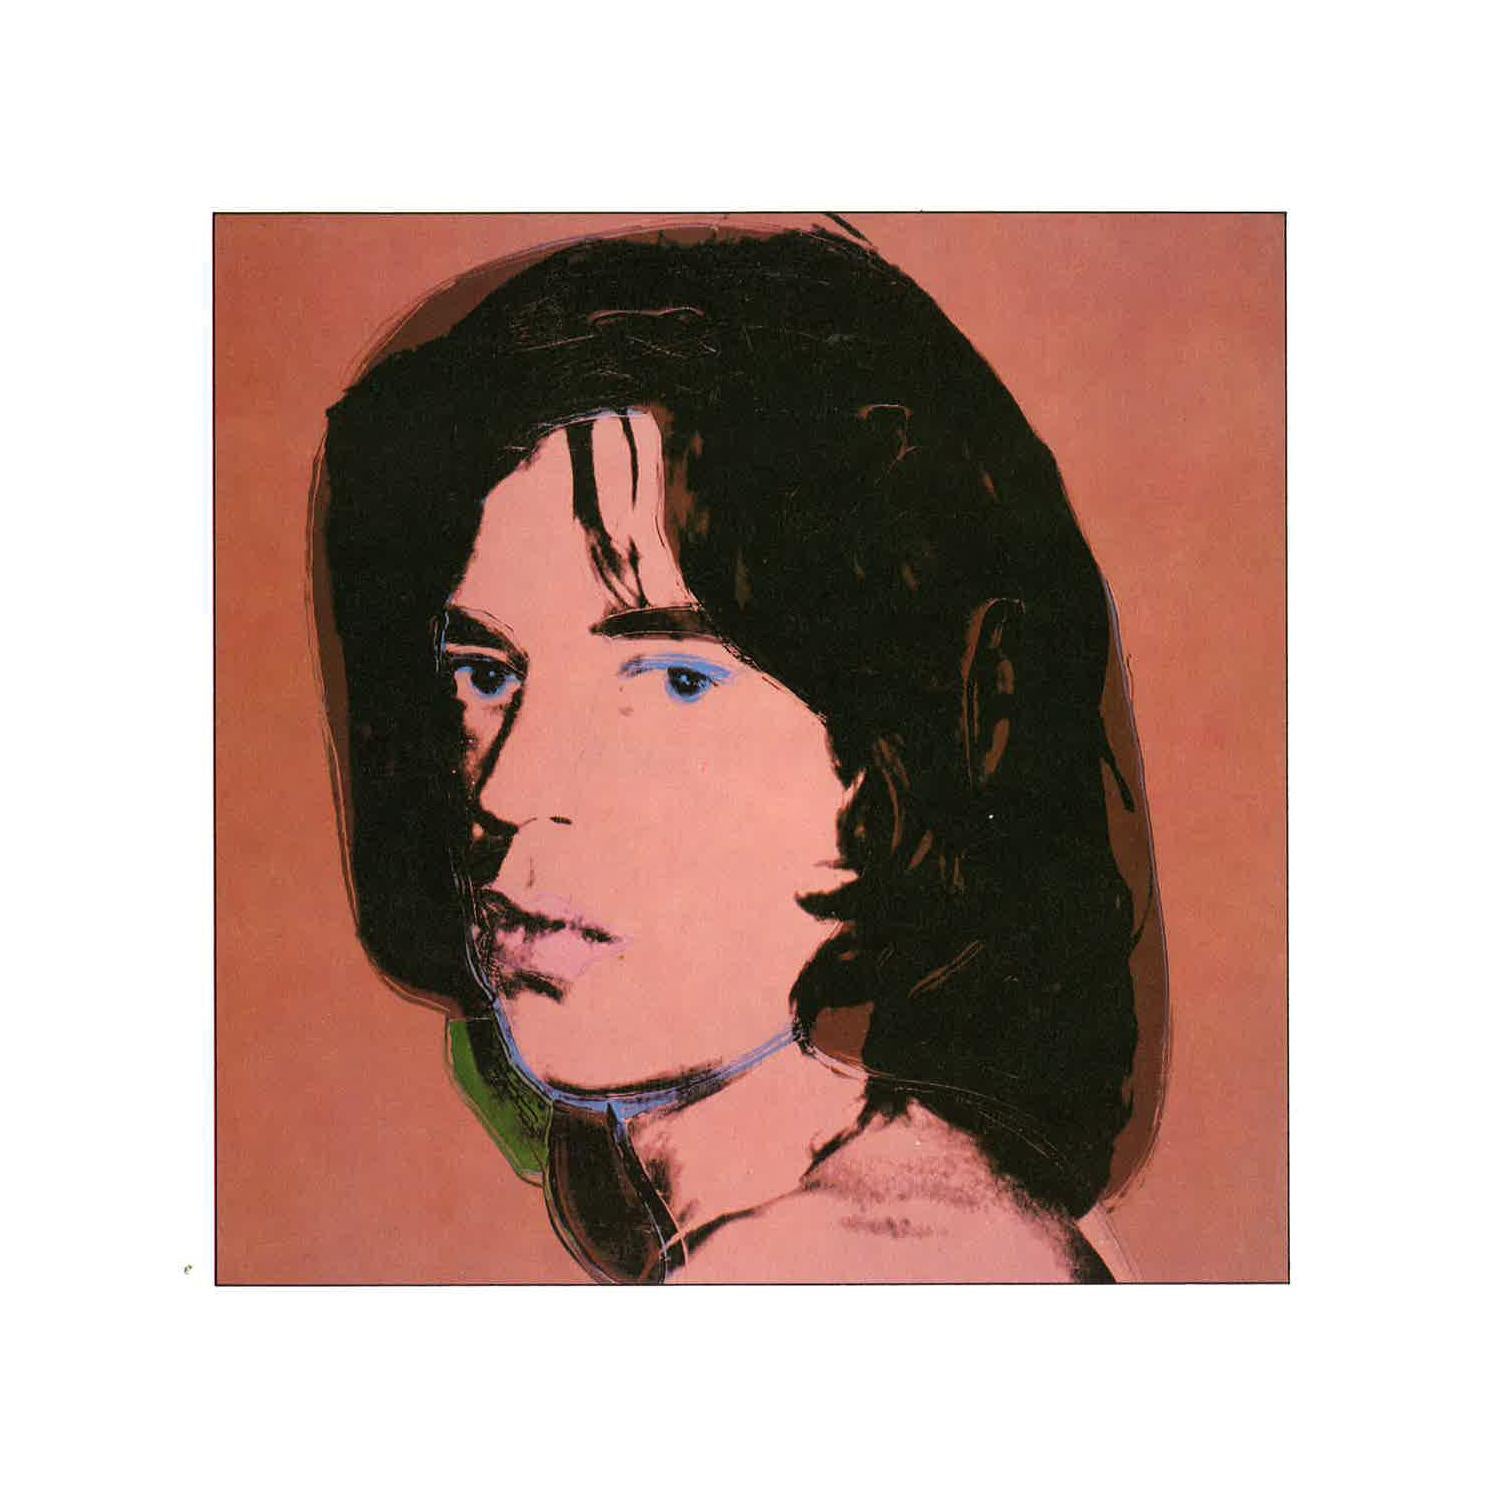 Vintage reproductive print after Warhol, Mick Jagger - Art by (after) Andy Warhol